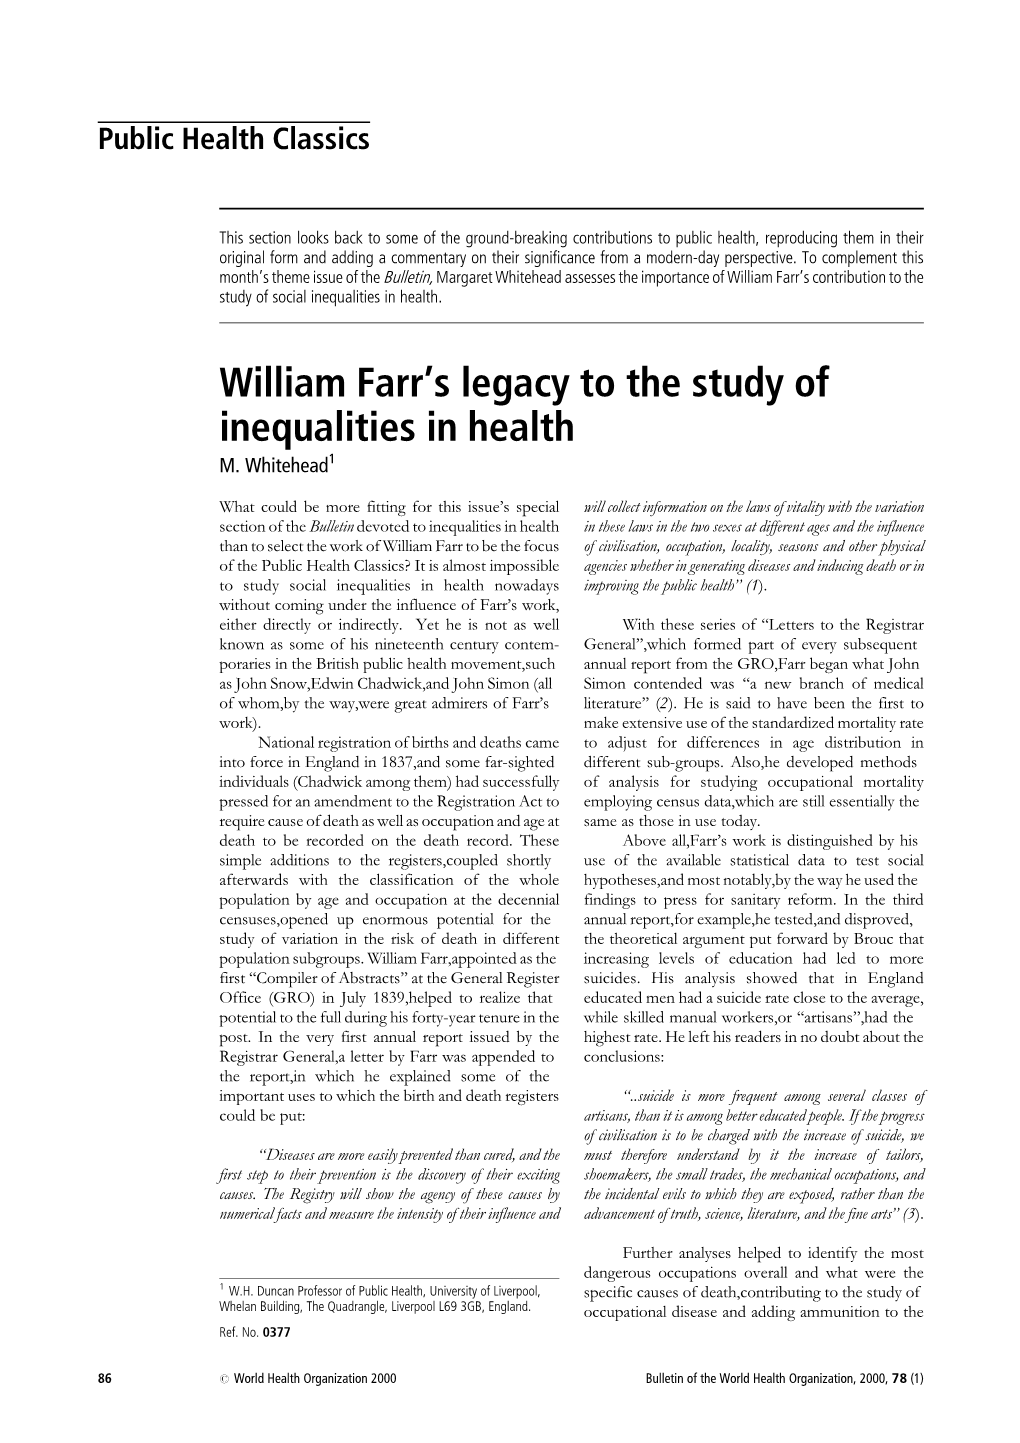 William Farr's Legacy to the Study of Inequalities in Health M